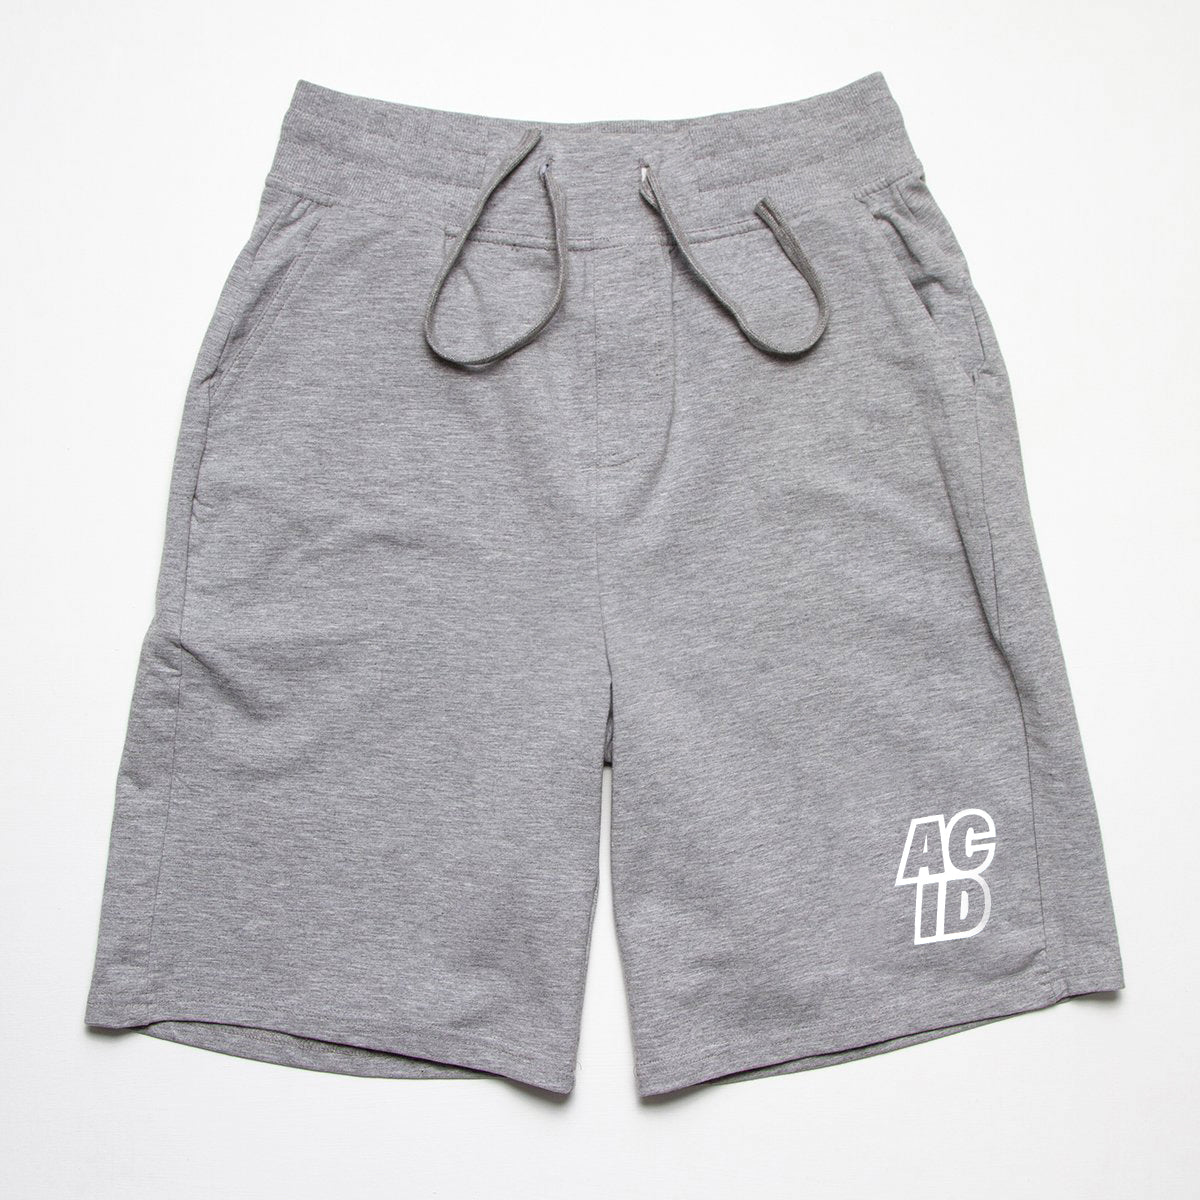 Acid Sport - Jersey Shorts - Grey - Wasted Heroes